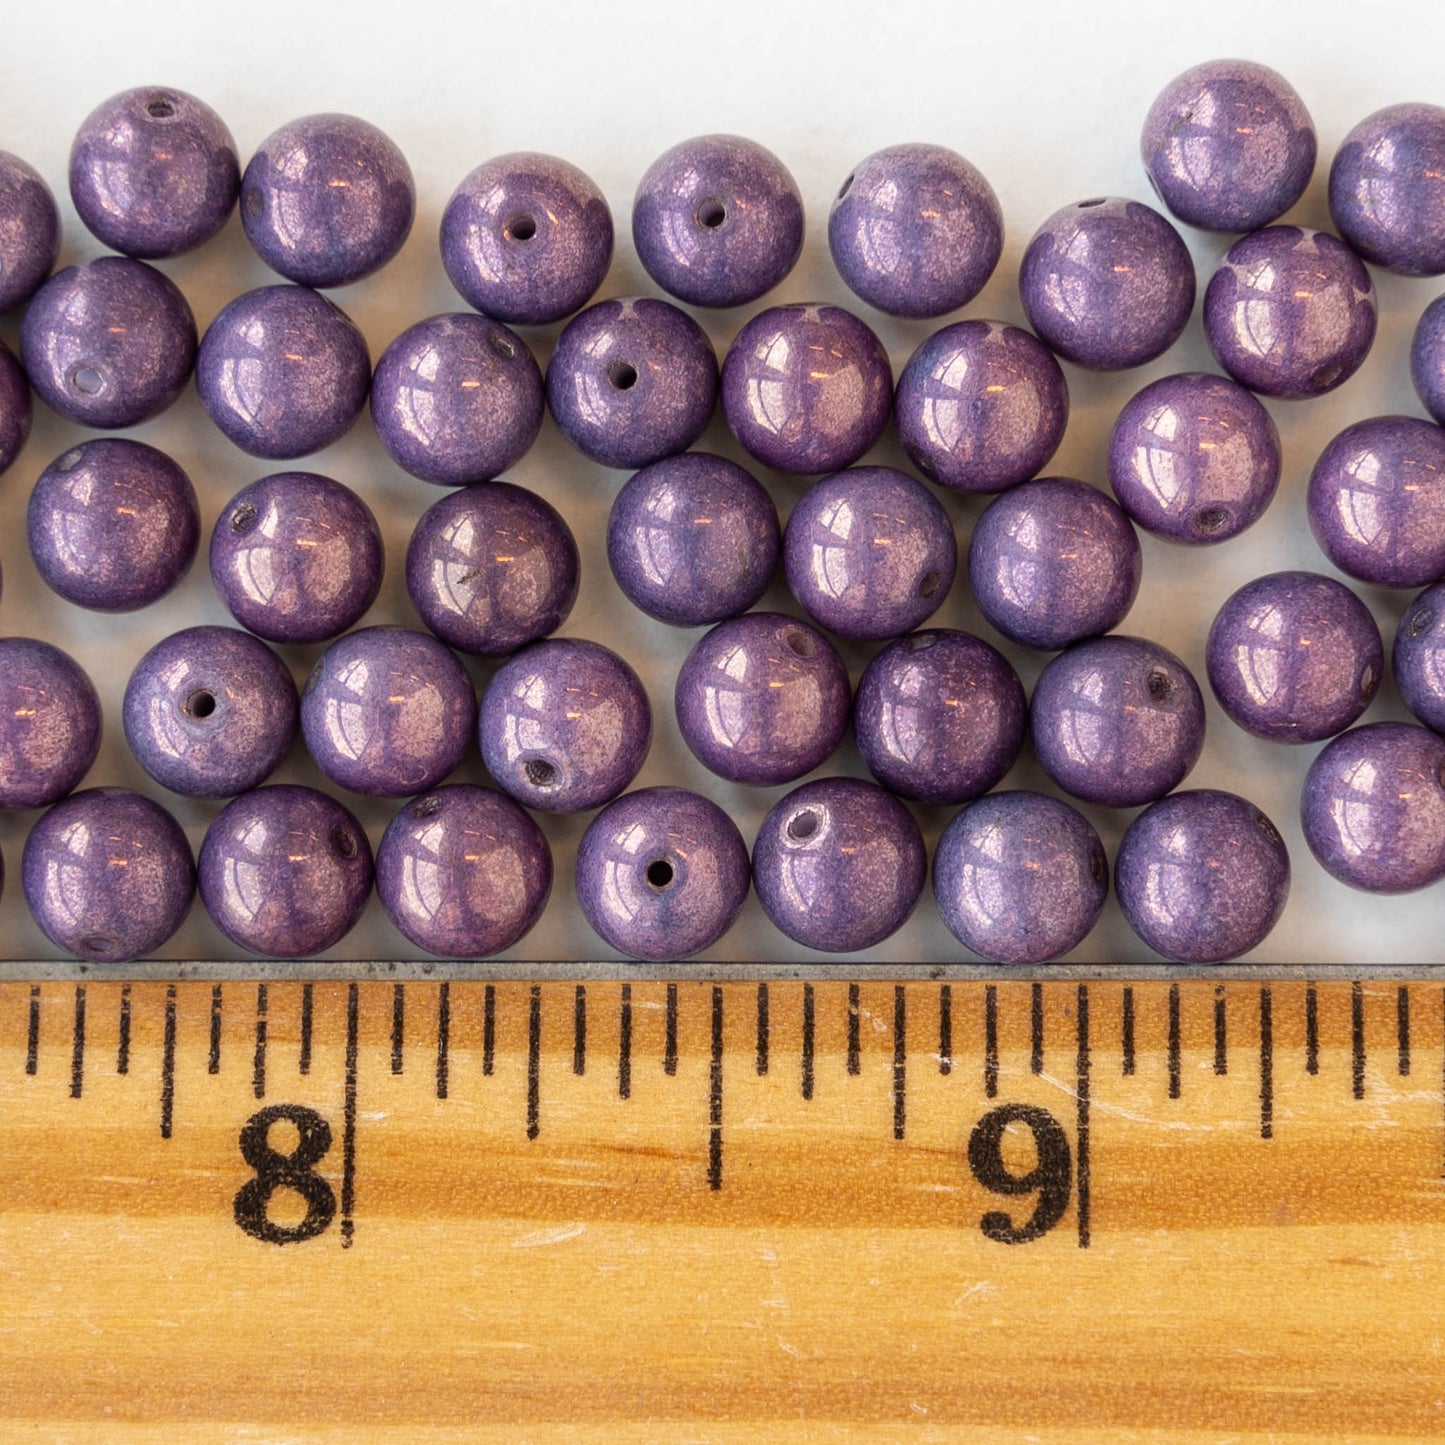 6mm Round Glass Beads - Pearly Purple Luster - 30 beads